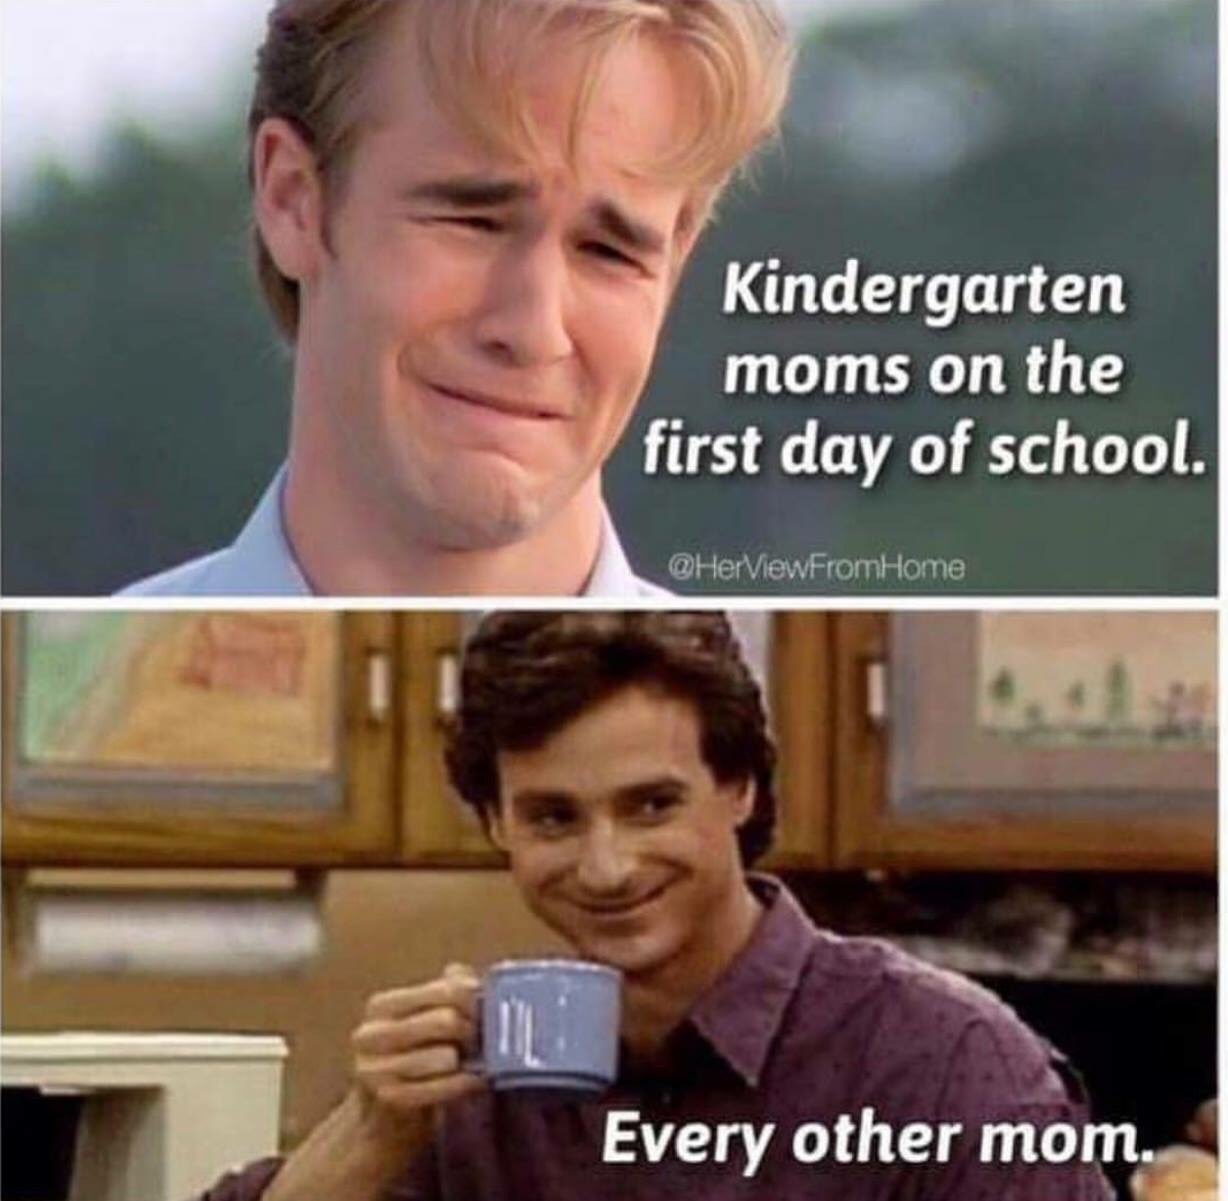 meme bitchy meme - Kindergarten moms on the first day of school. Home Every other mom.